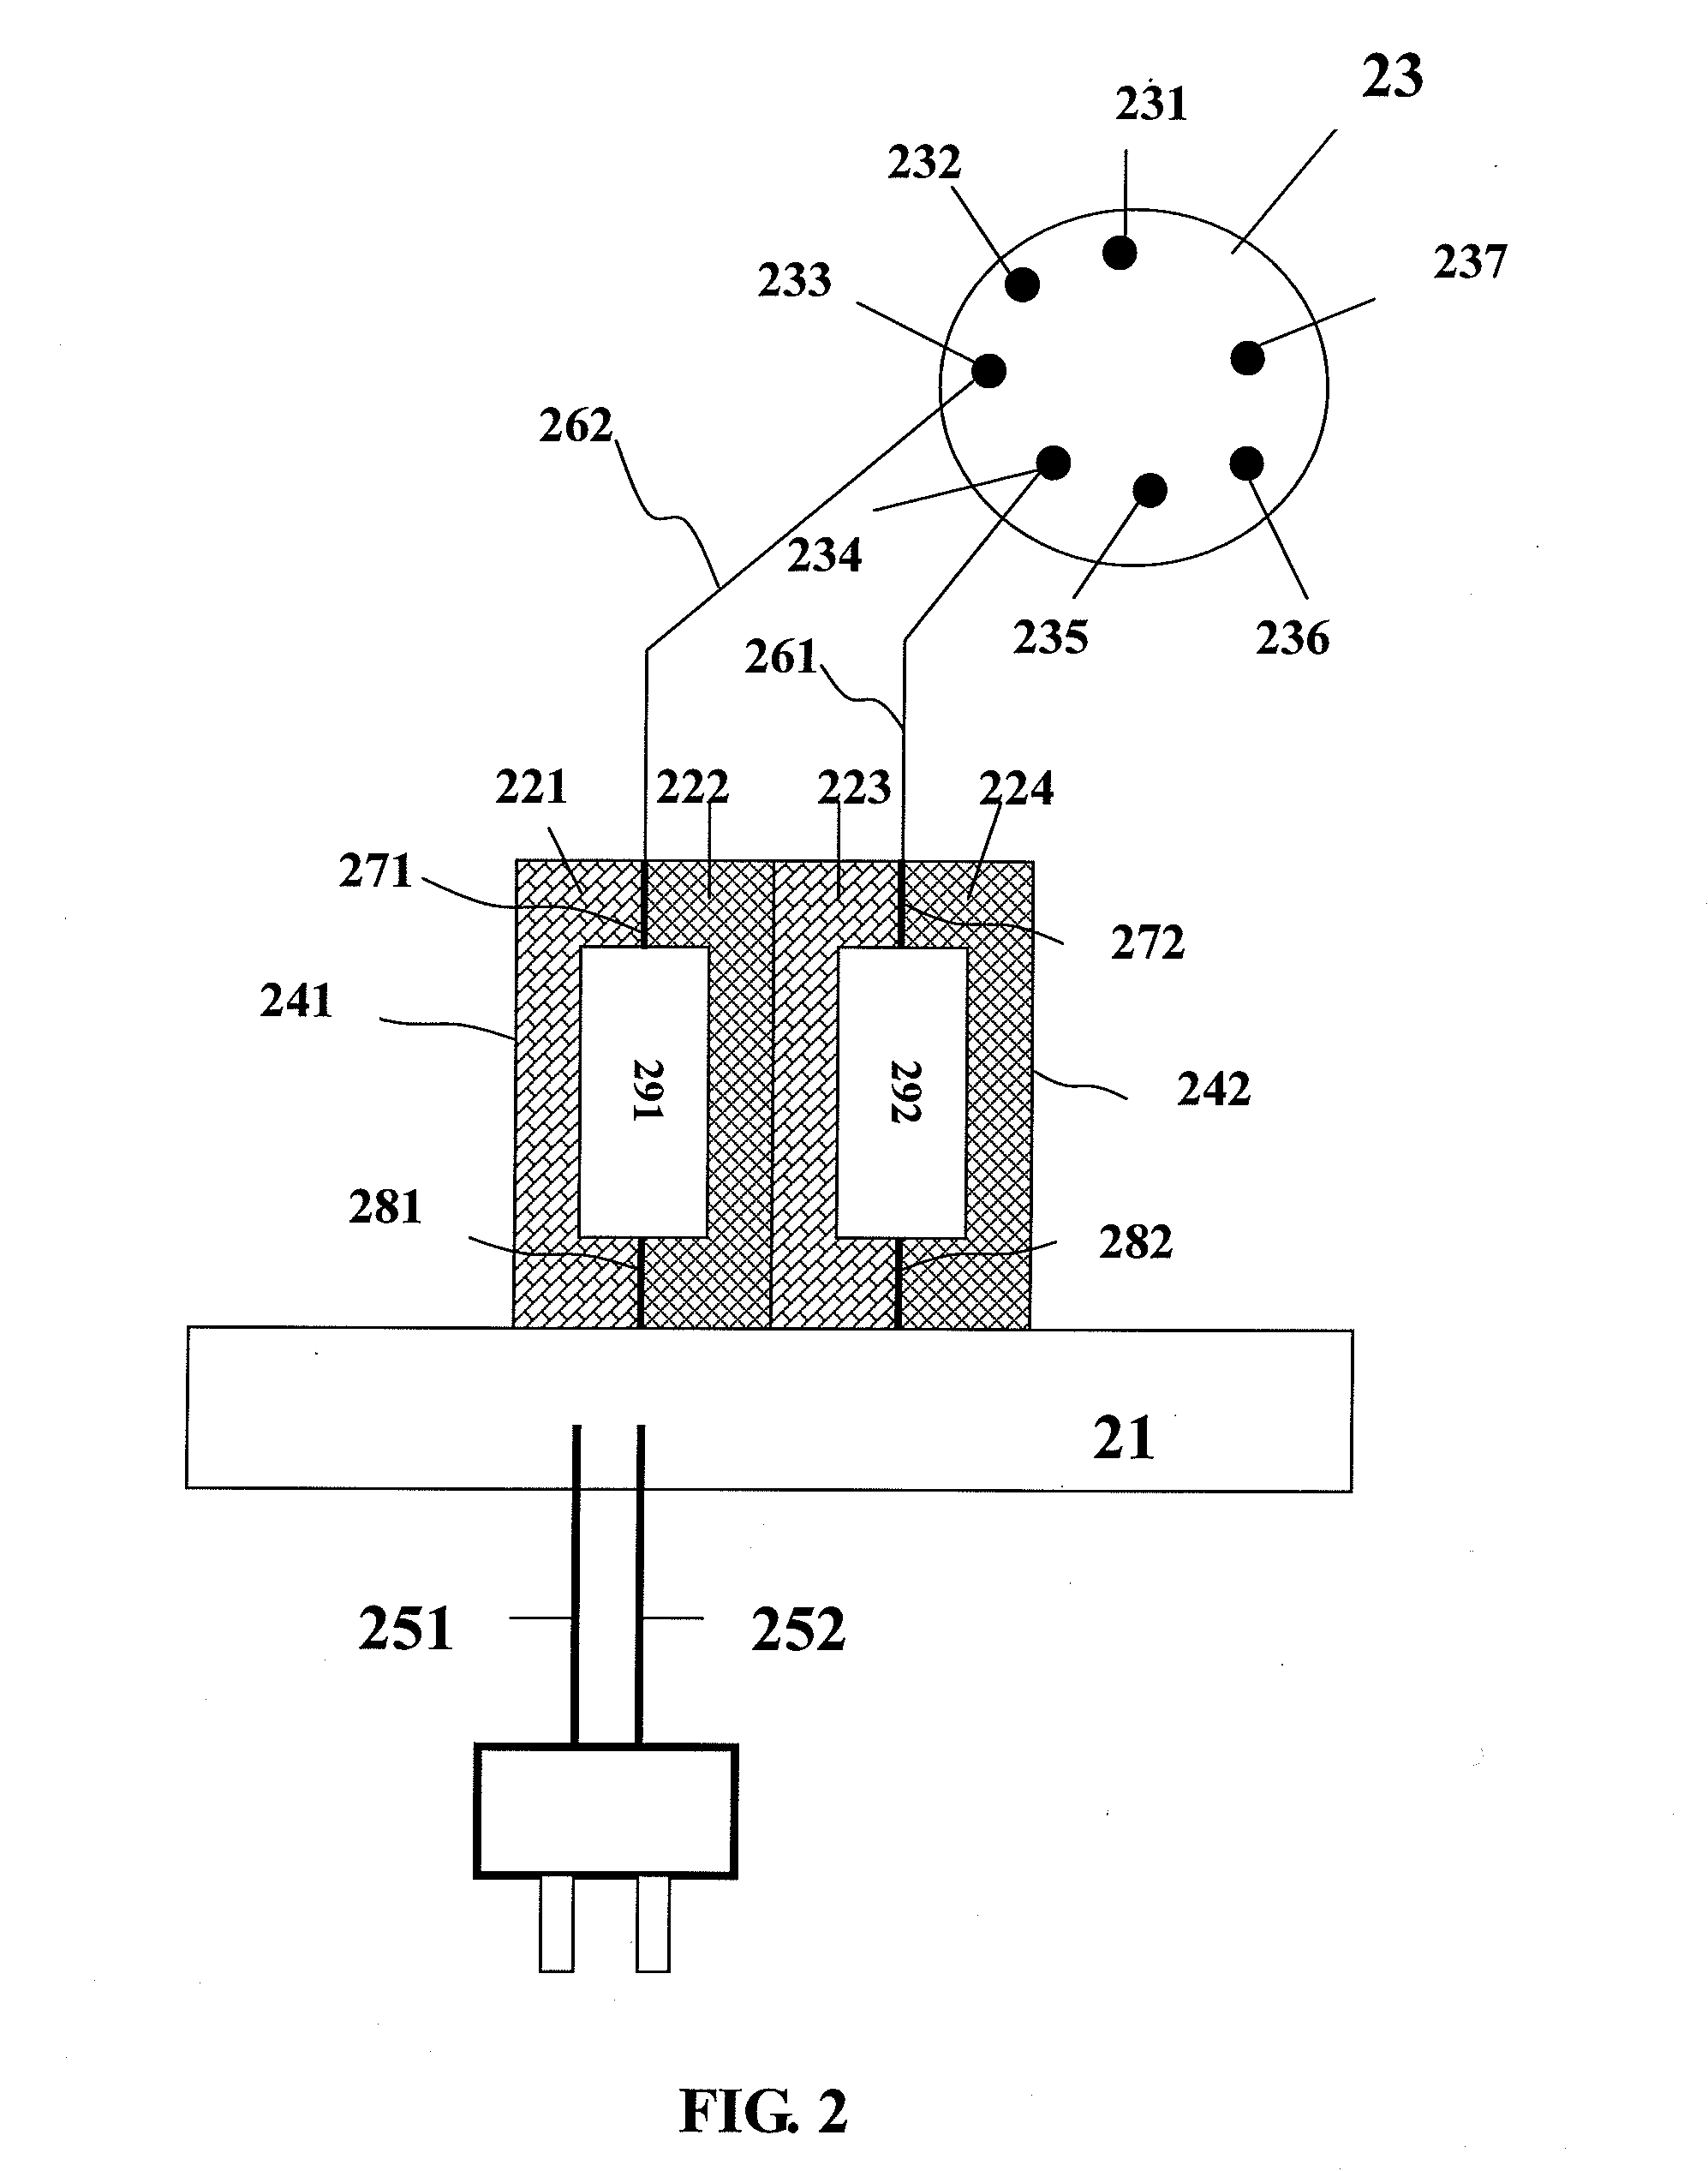 Individual-Charge and Merged-Discharge Battery Set